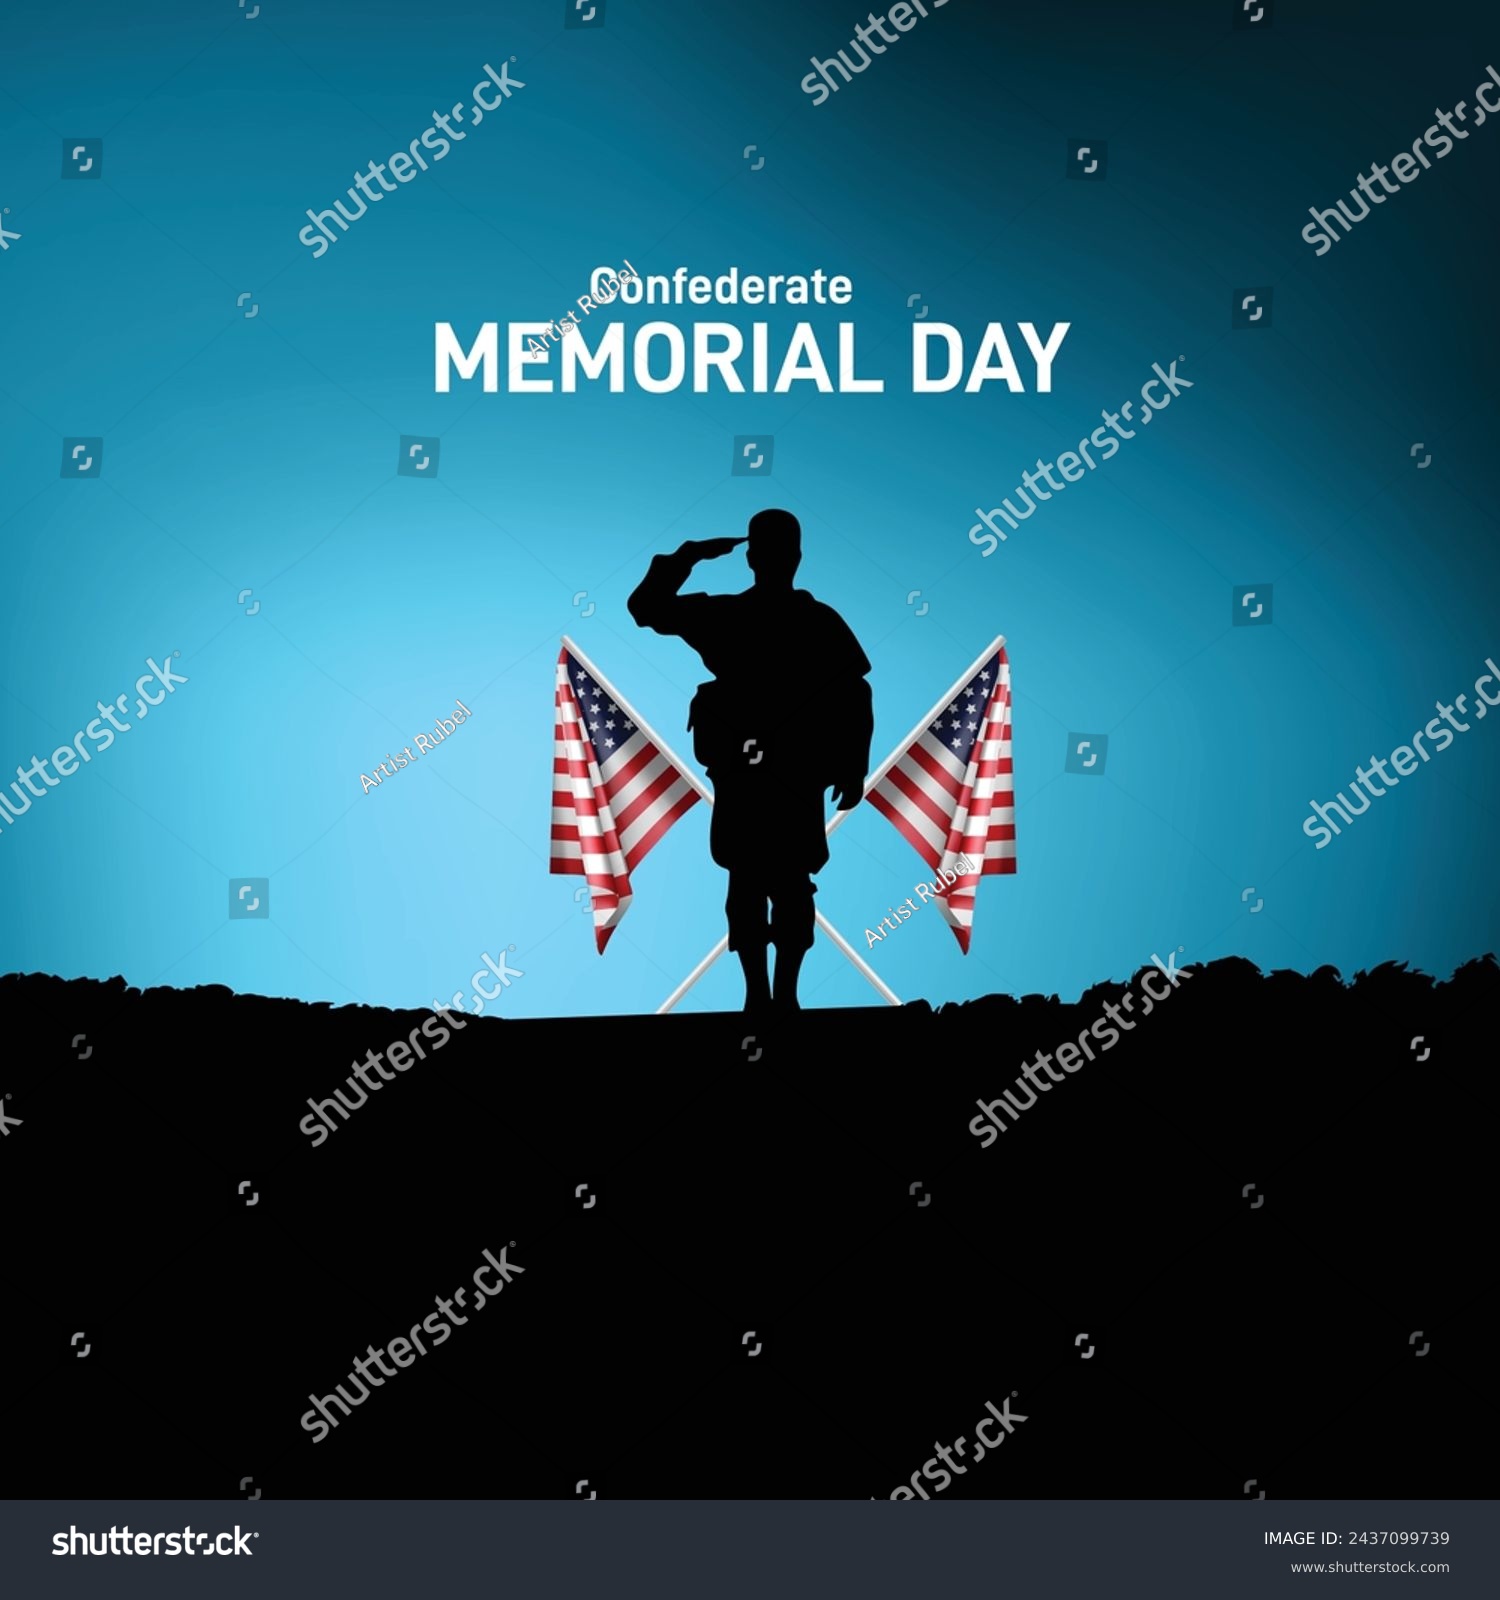 SVG of confederate memorial day. confederate memorial concept vector banner, poster, greetings card etc.  svg